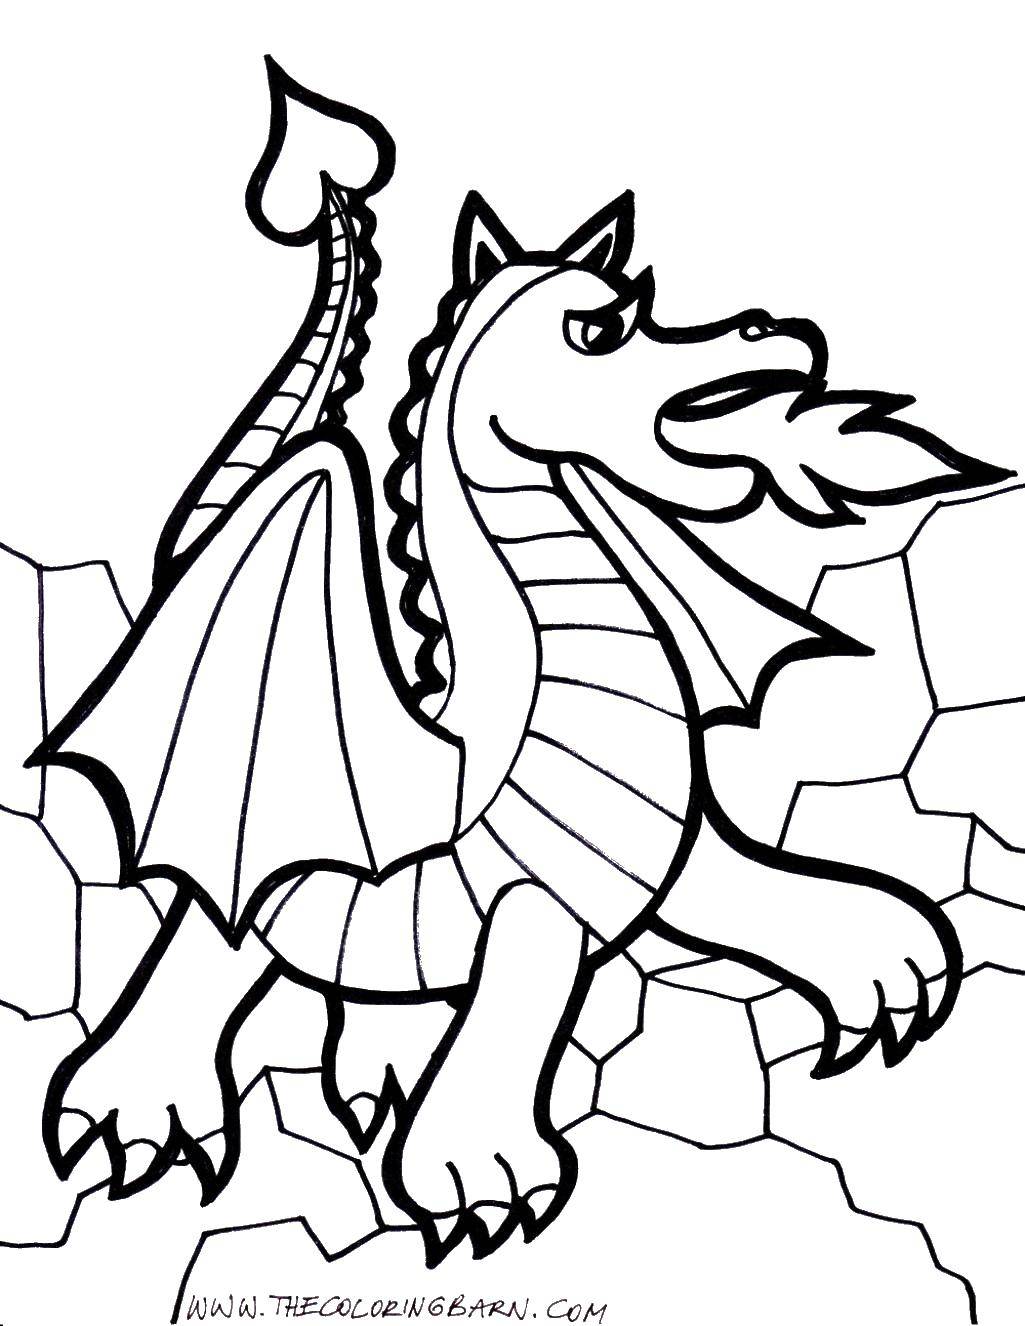 Coloring Dragon on the rocks. Category Dragons. Tags:  Dragons.